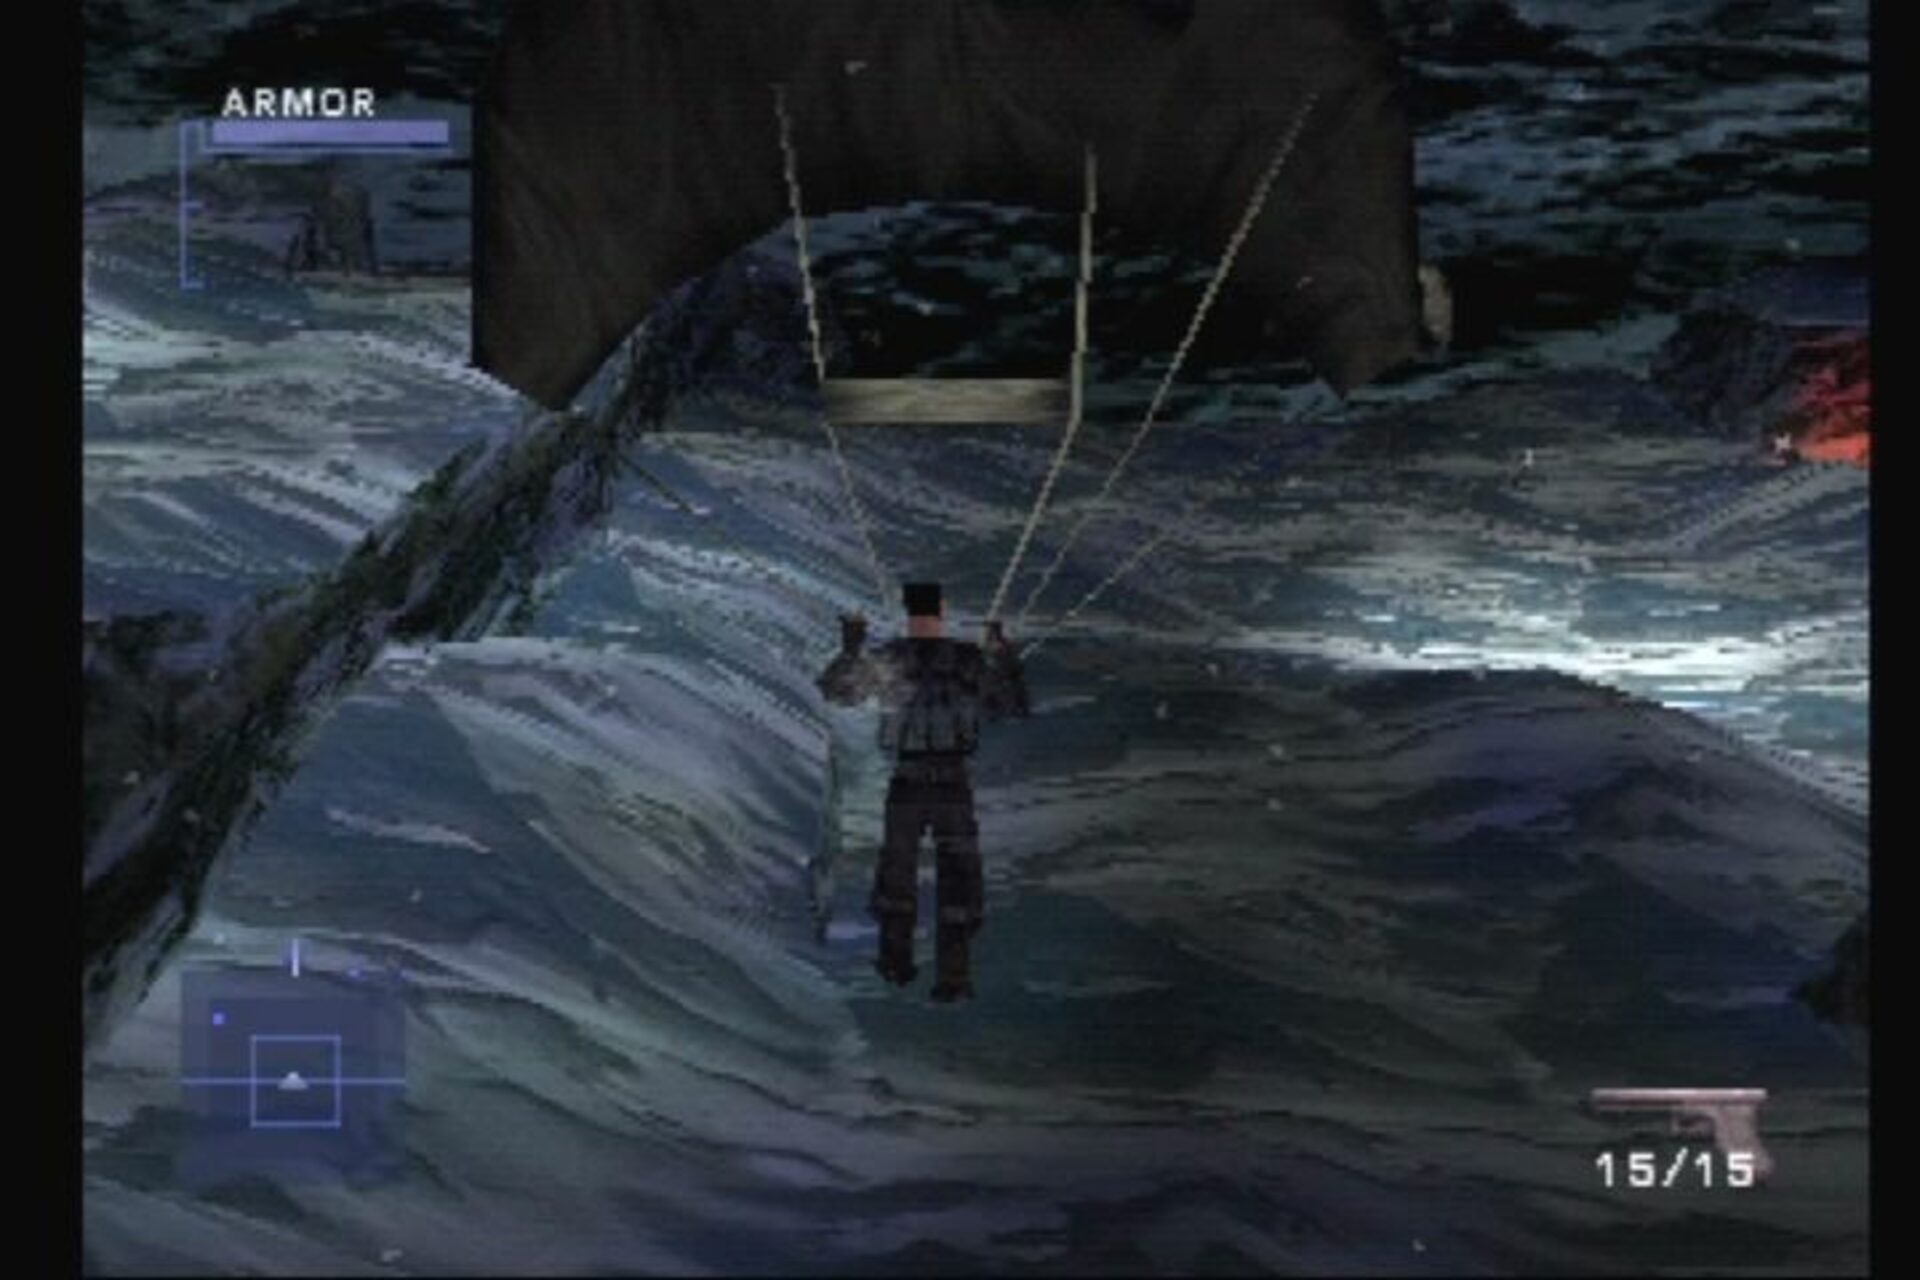 Buy Syphon Filter 2 PS1 CD! Cheap game price